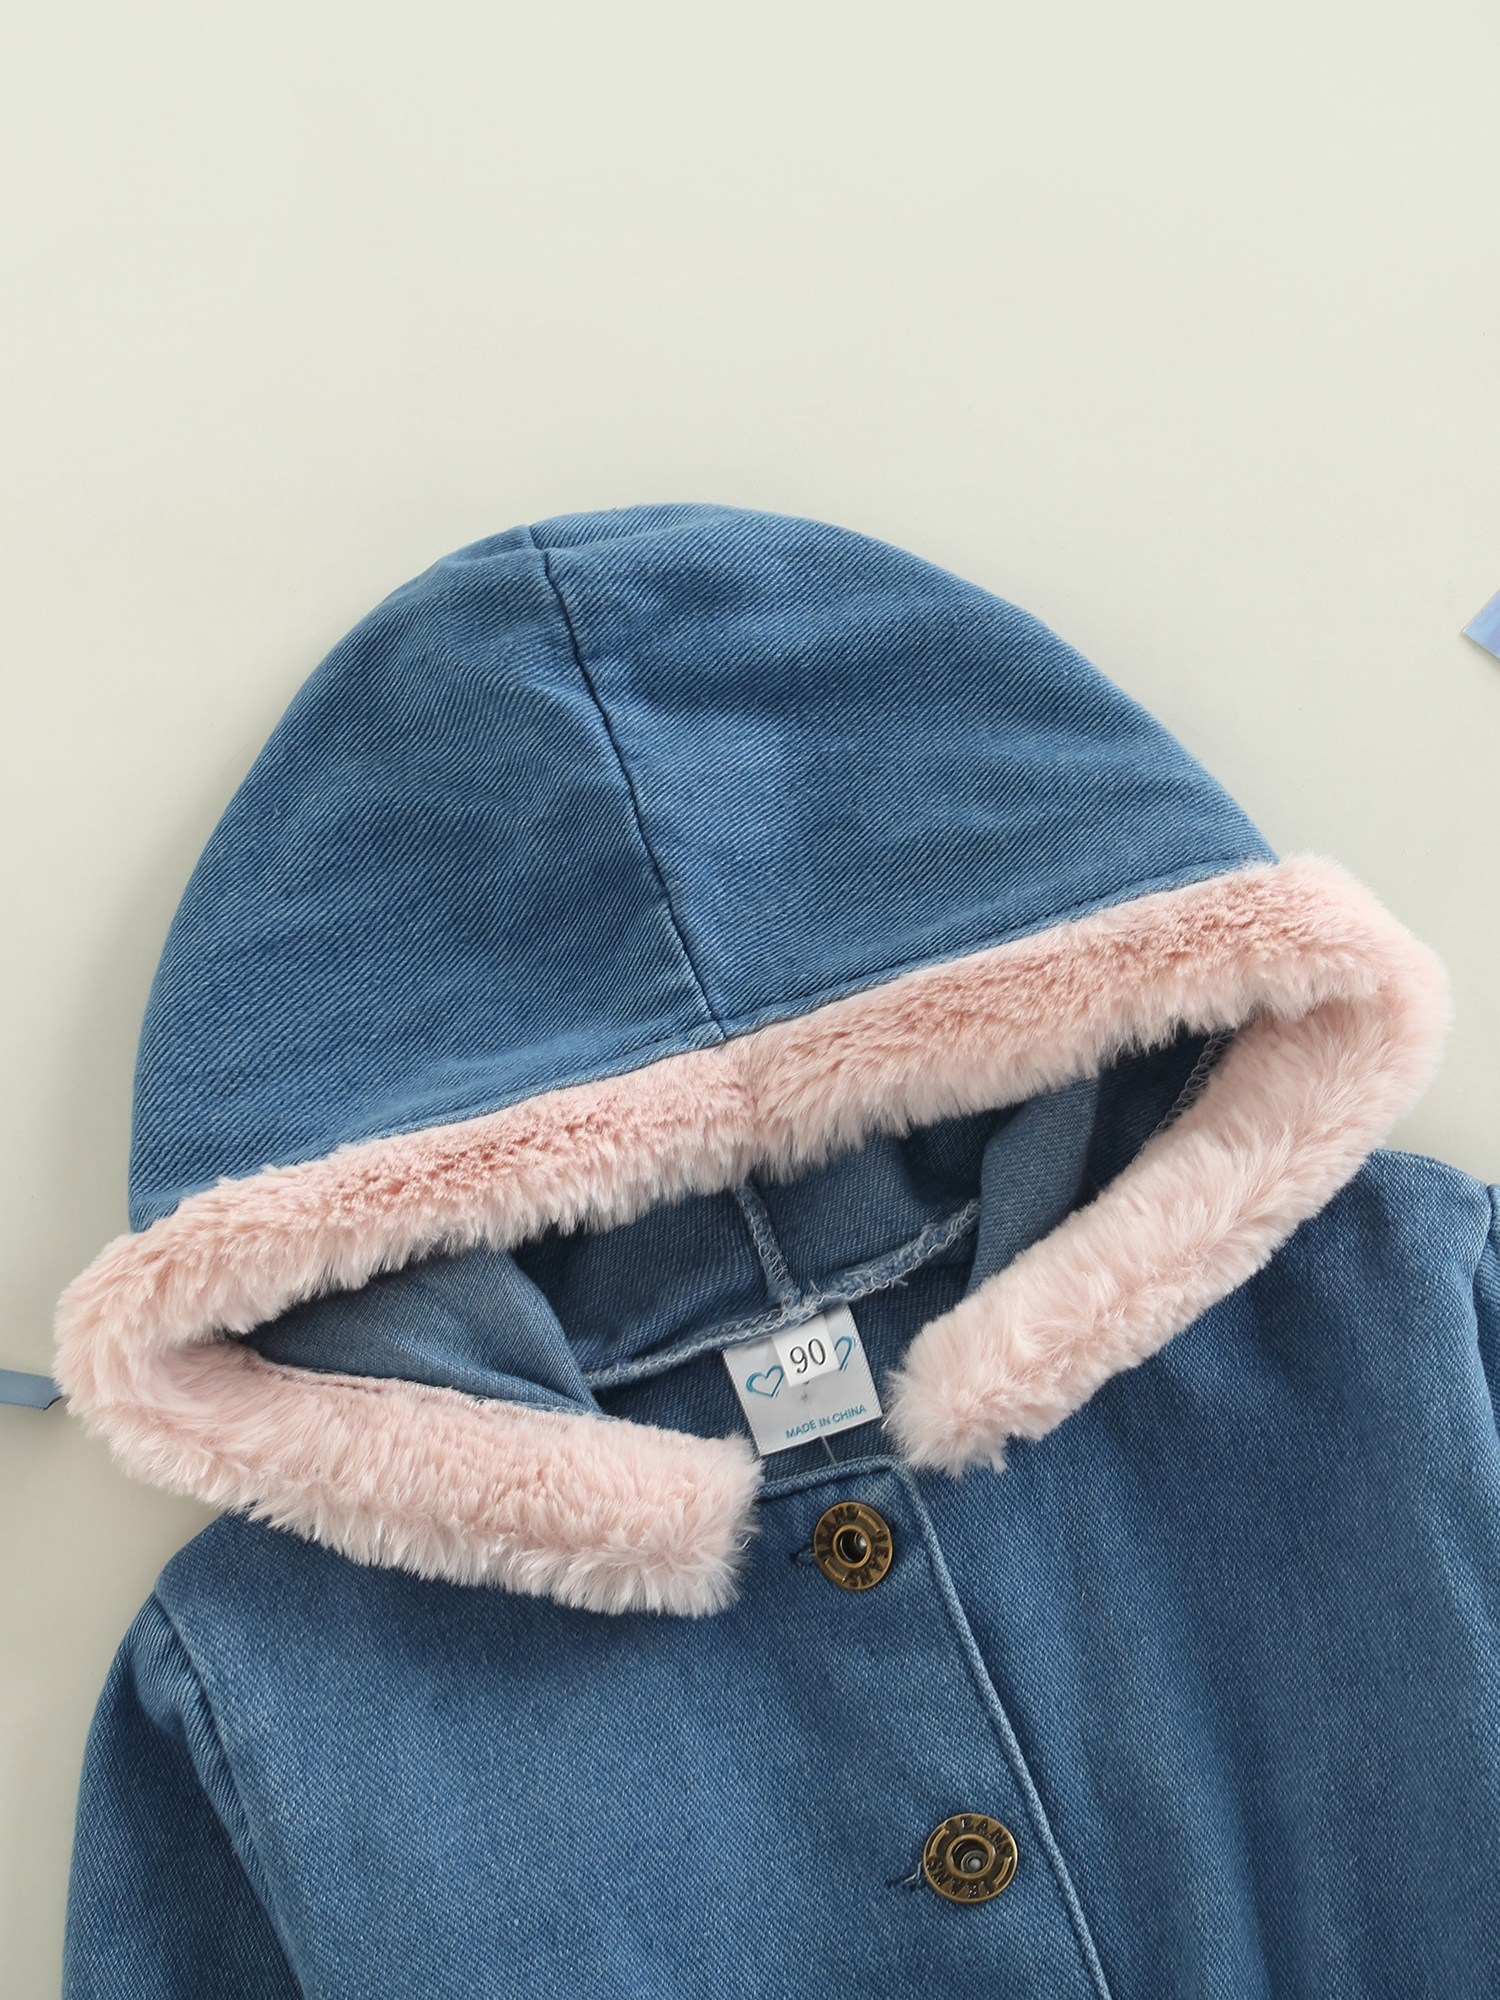 Jxzom Toddler Girls Hooded Denim Coat Long Sleeves Button Closure Thick Autumn Winter Jean Jacket - image 4 of 7